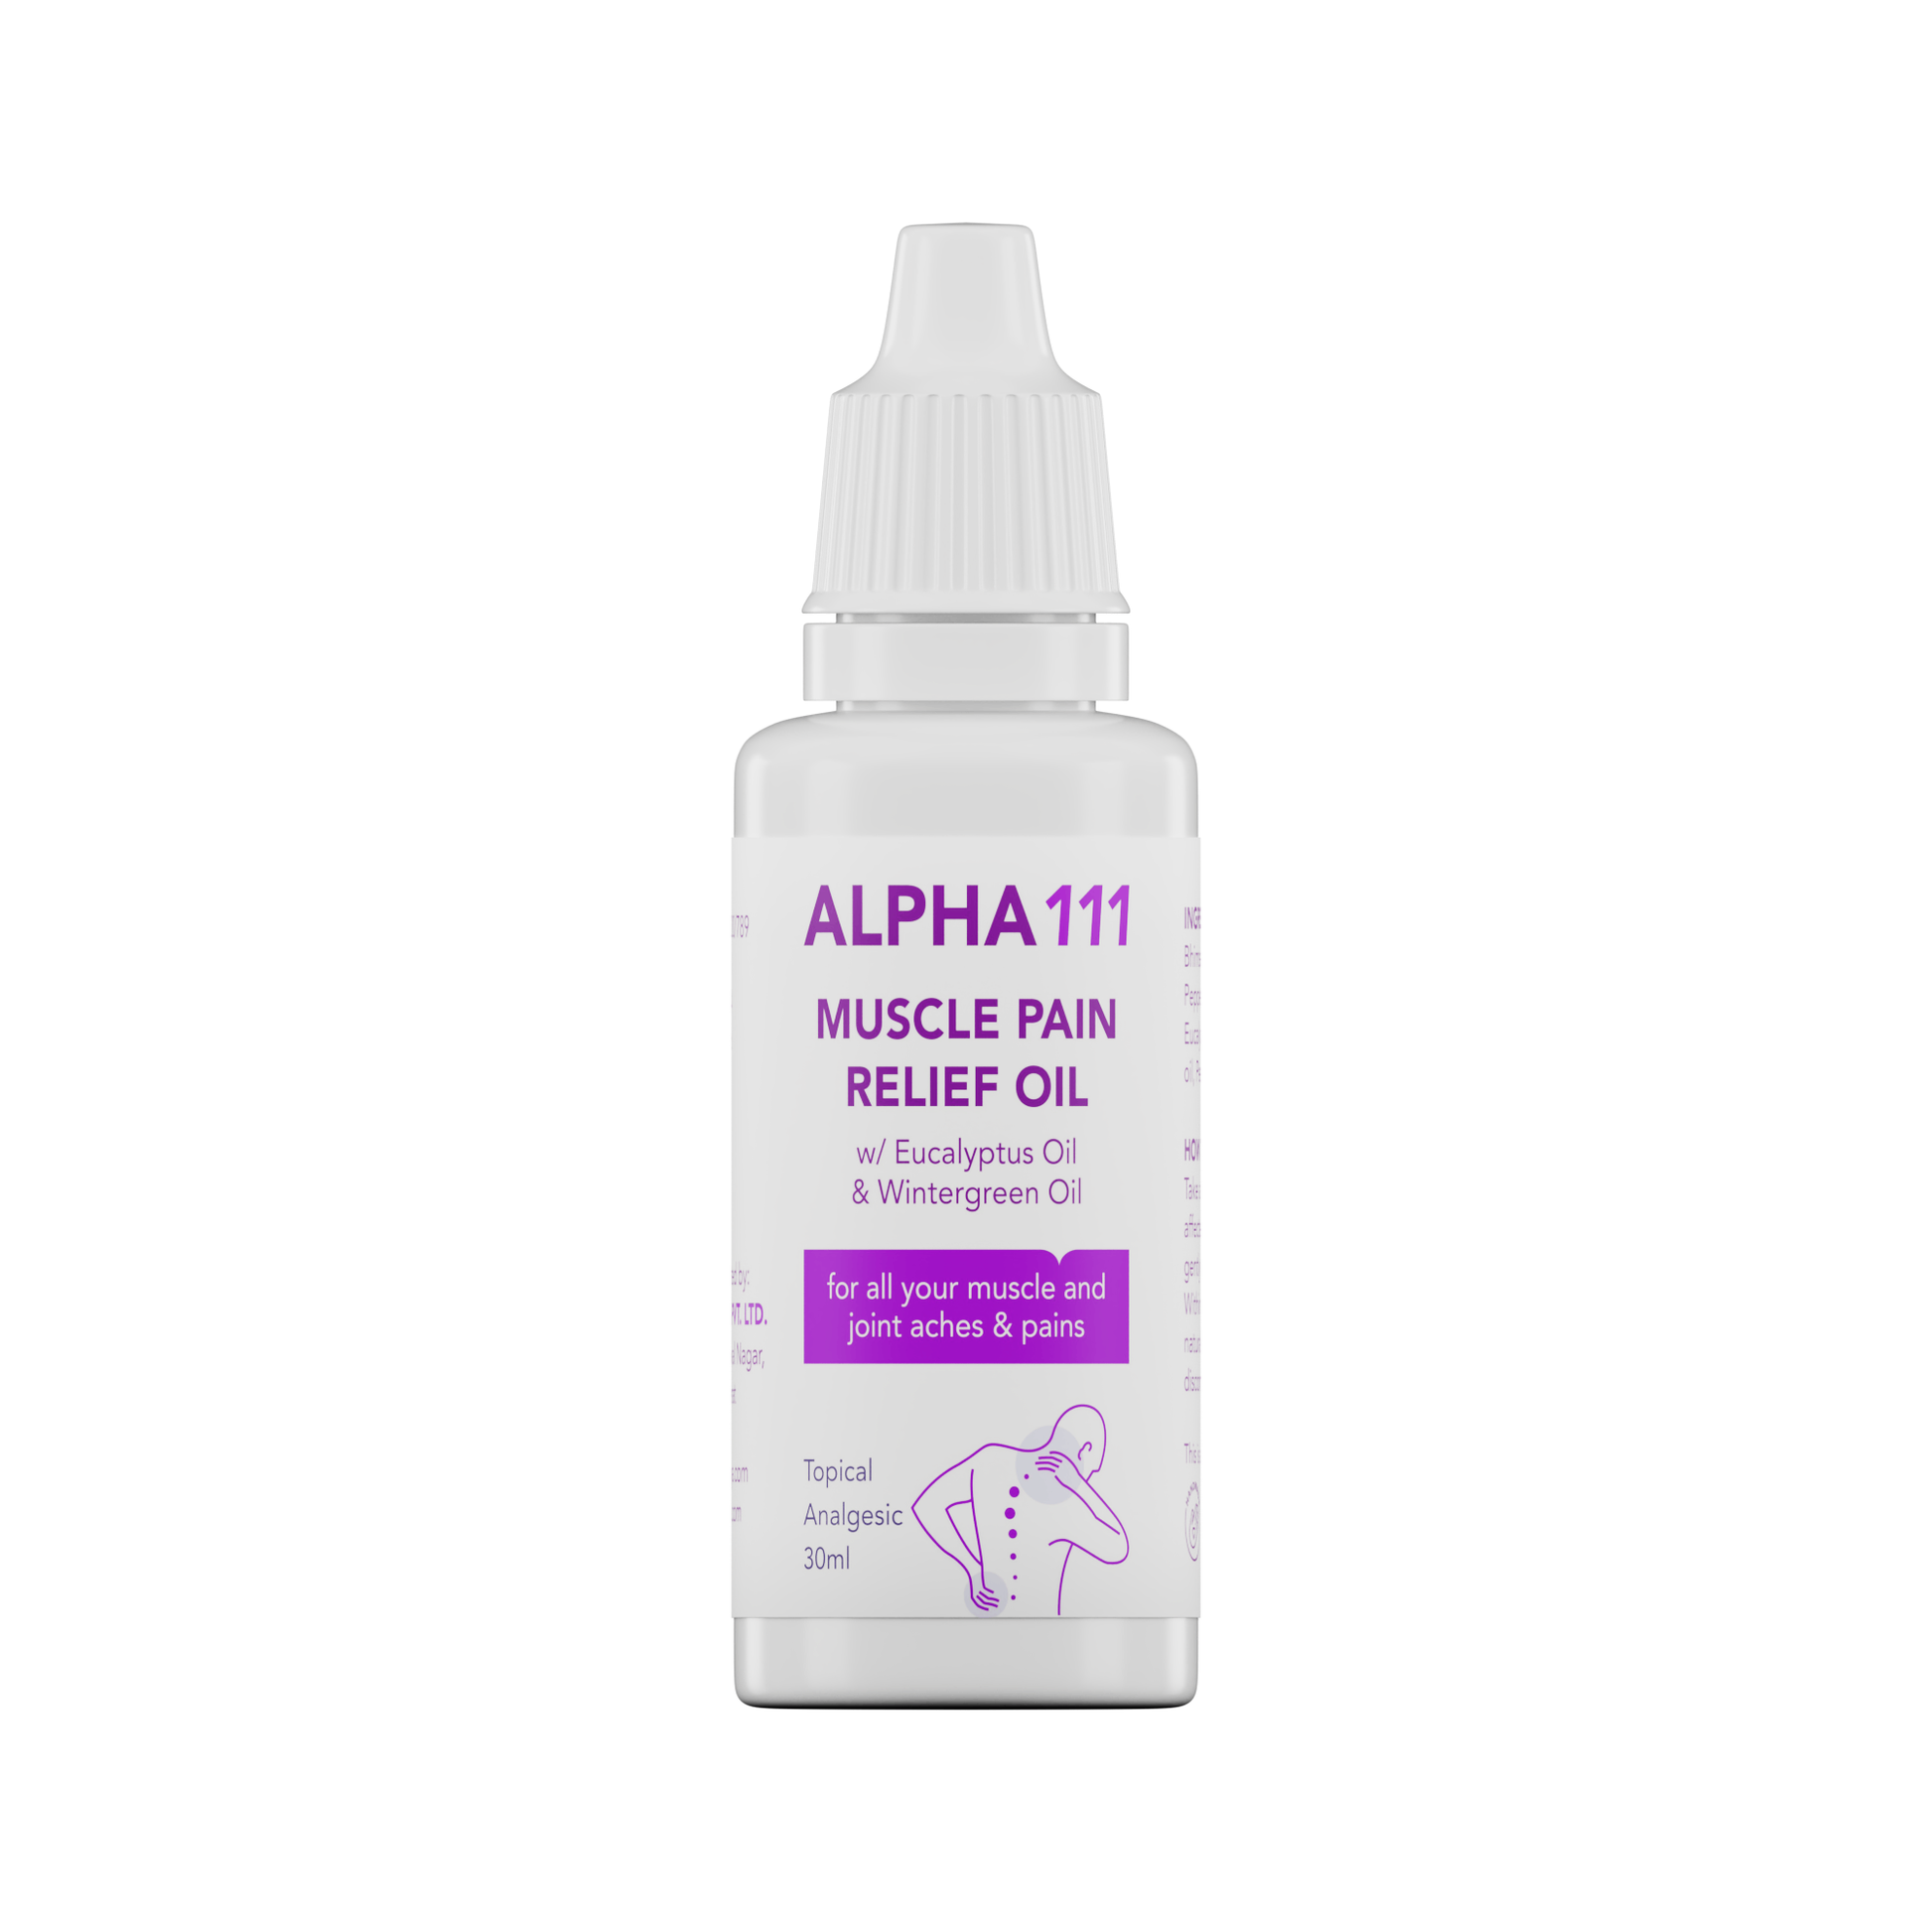 Alpha 111 Muscle Pain Relief Oil